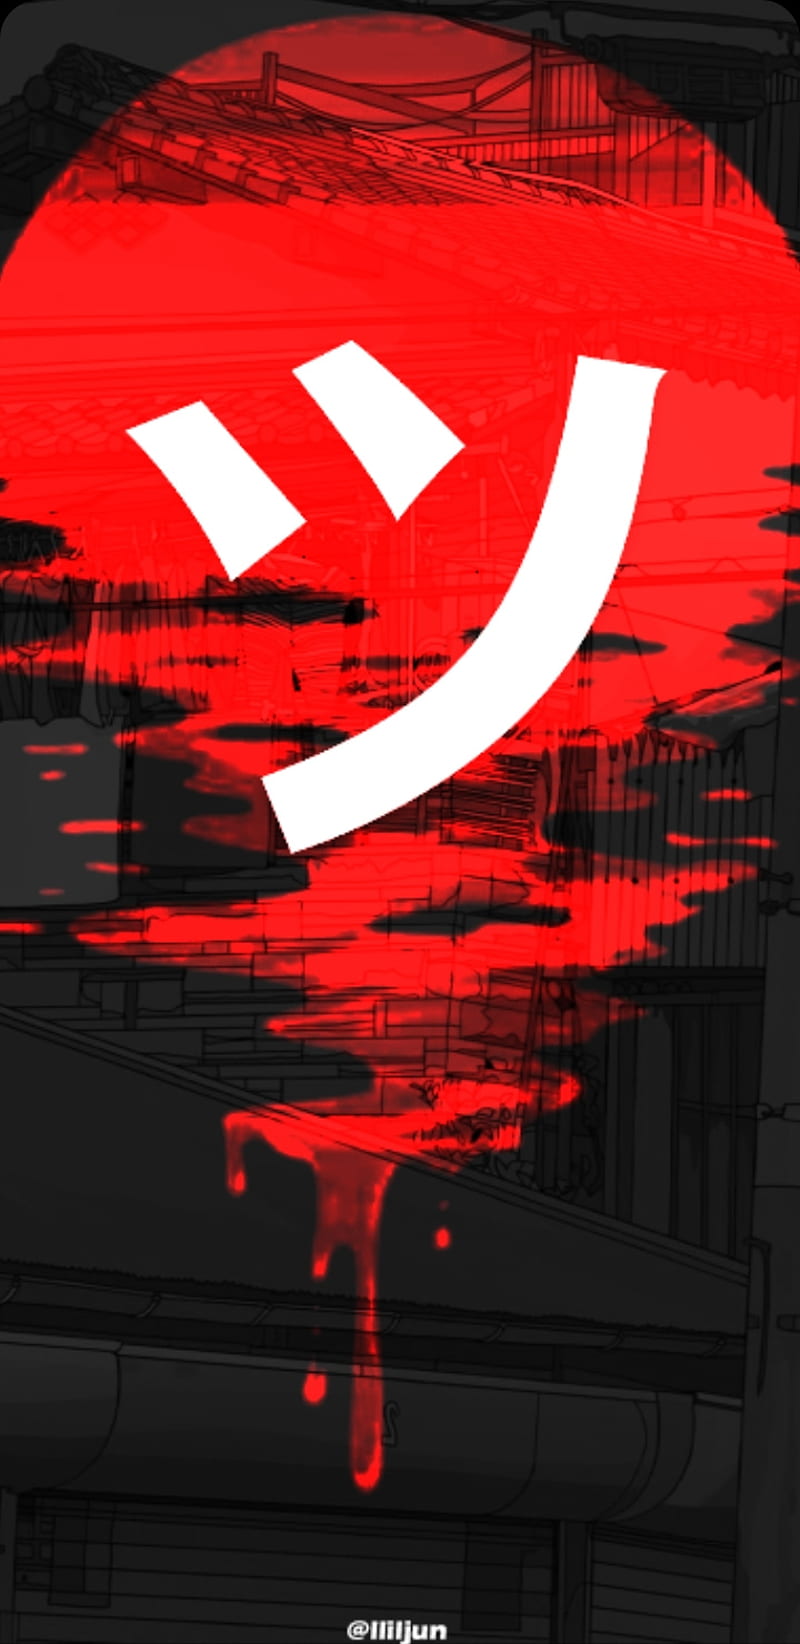 red vibe wallpaper